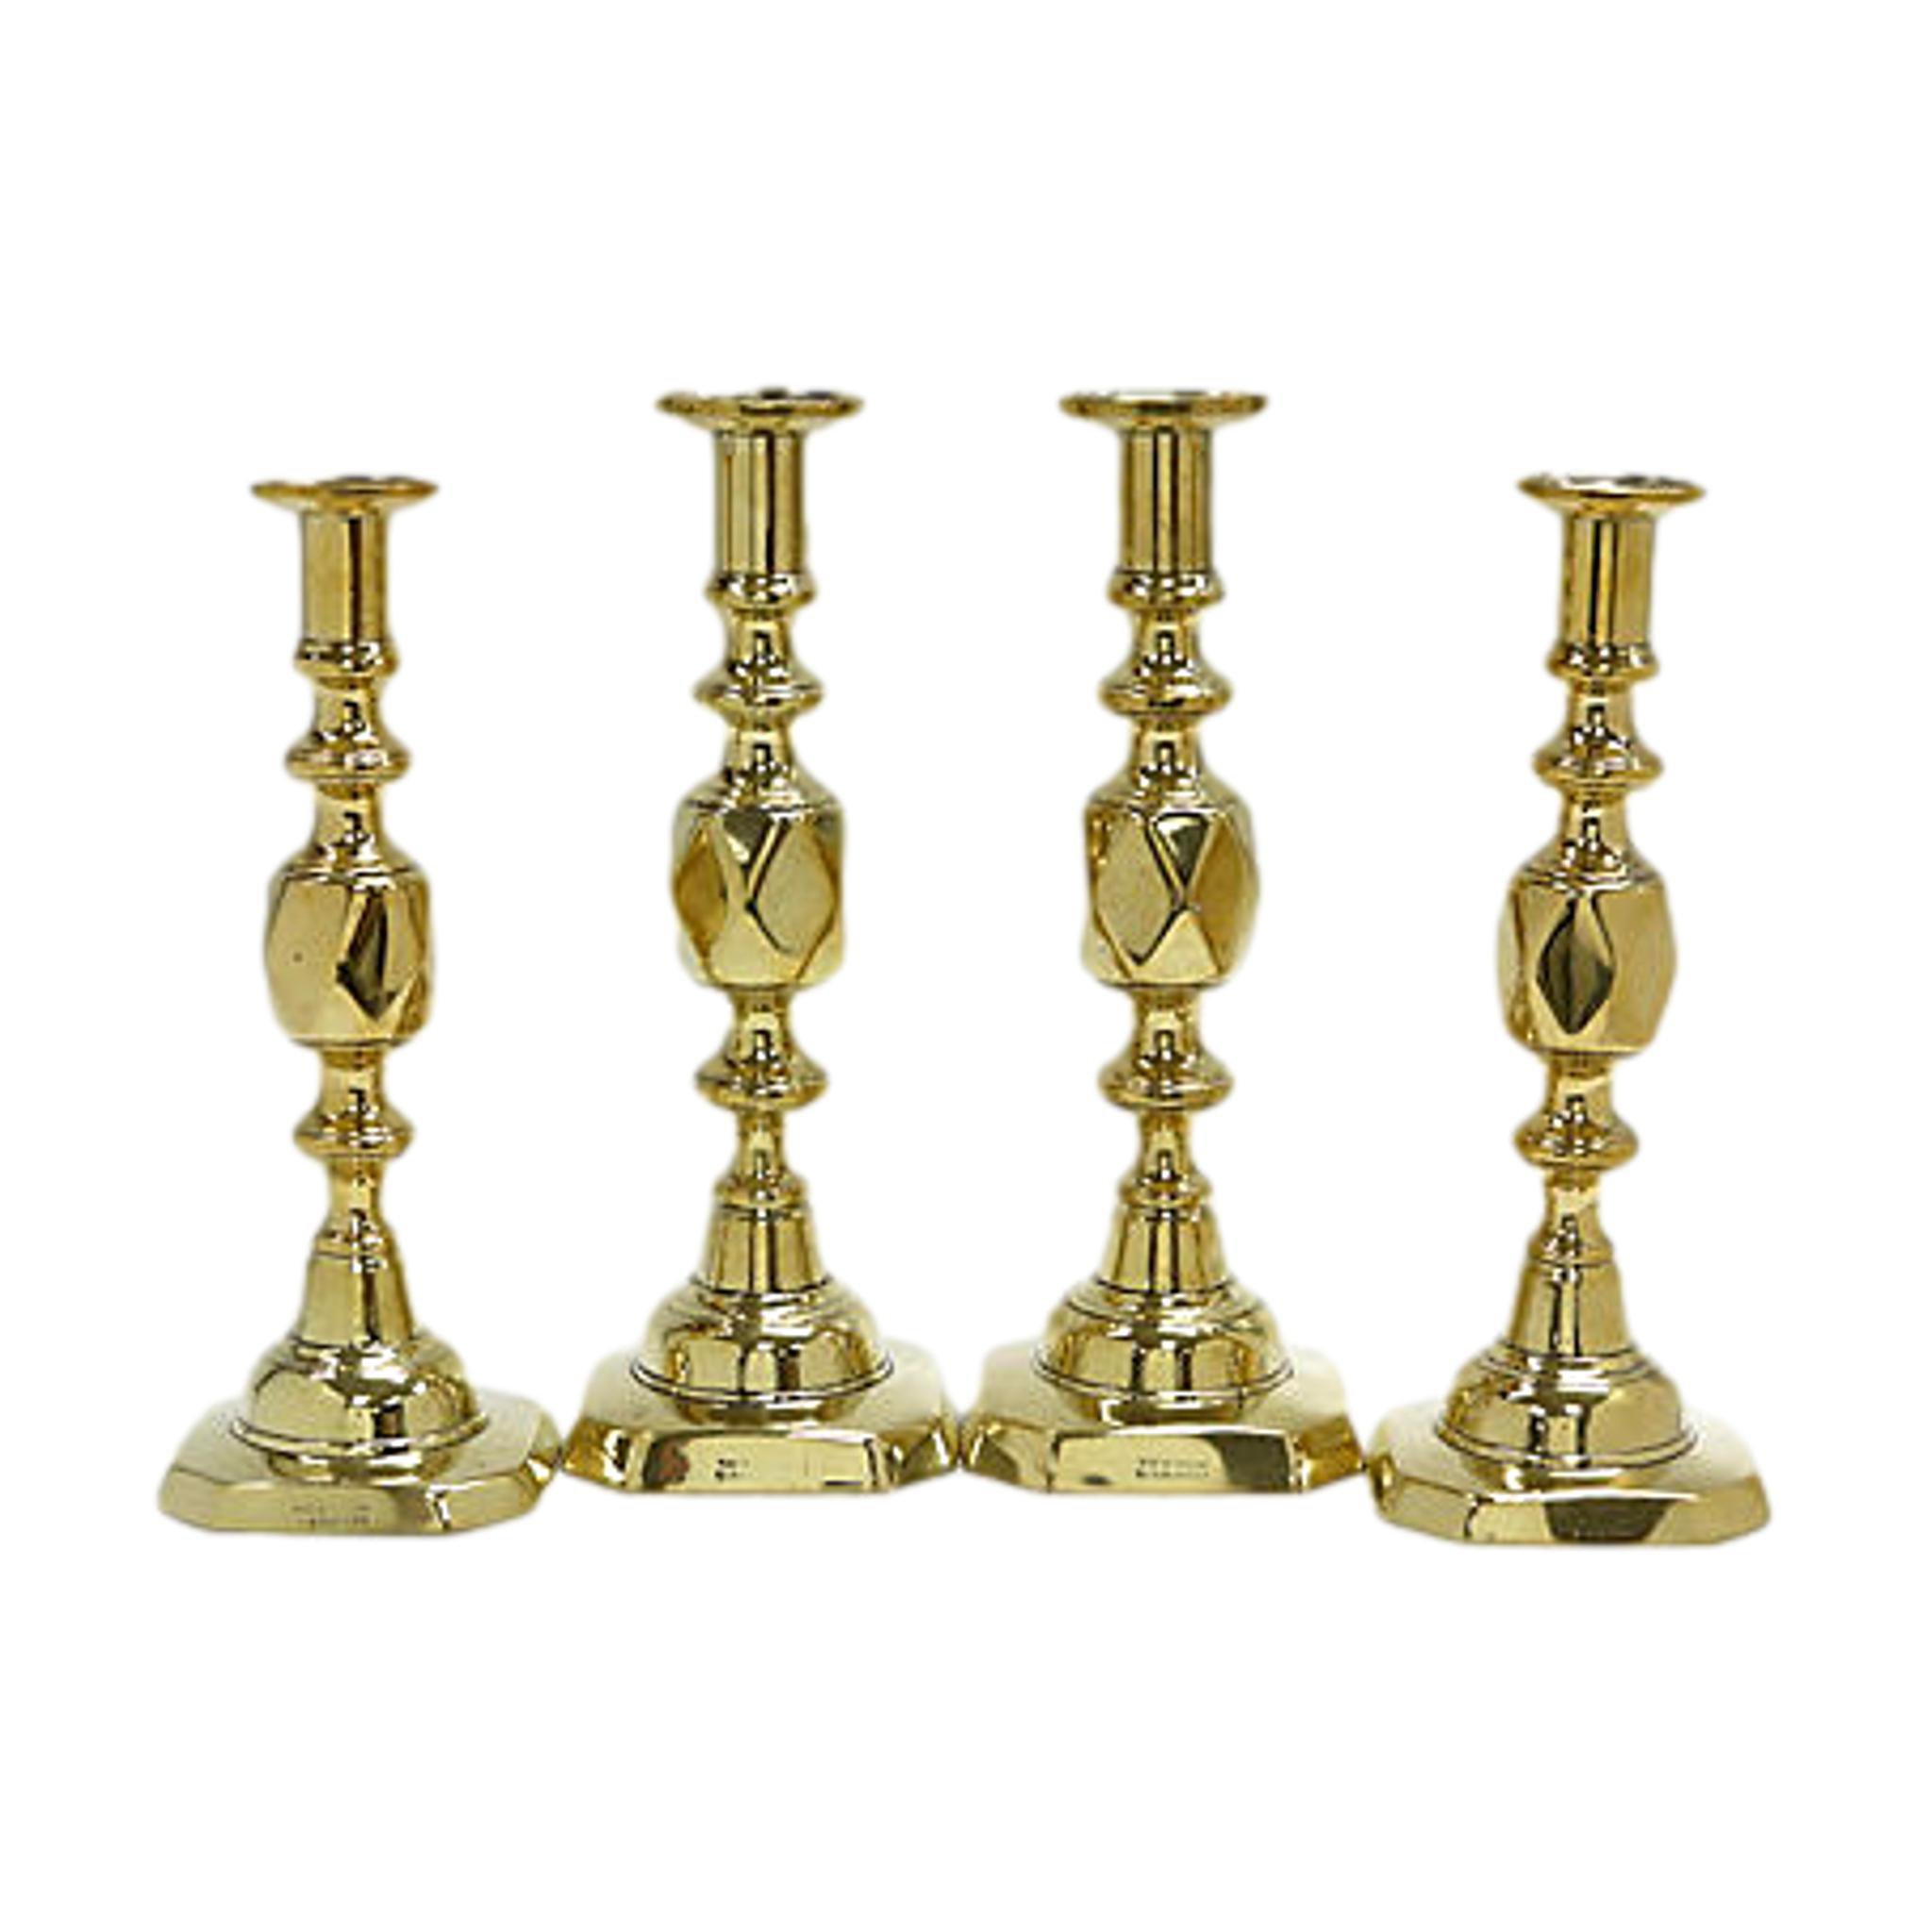 Candlesticks & Candle Holders from One Kings Lane